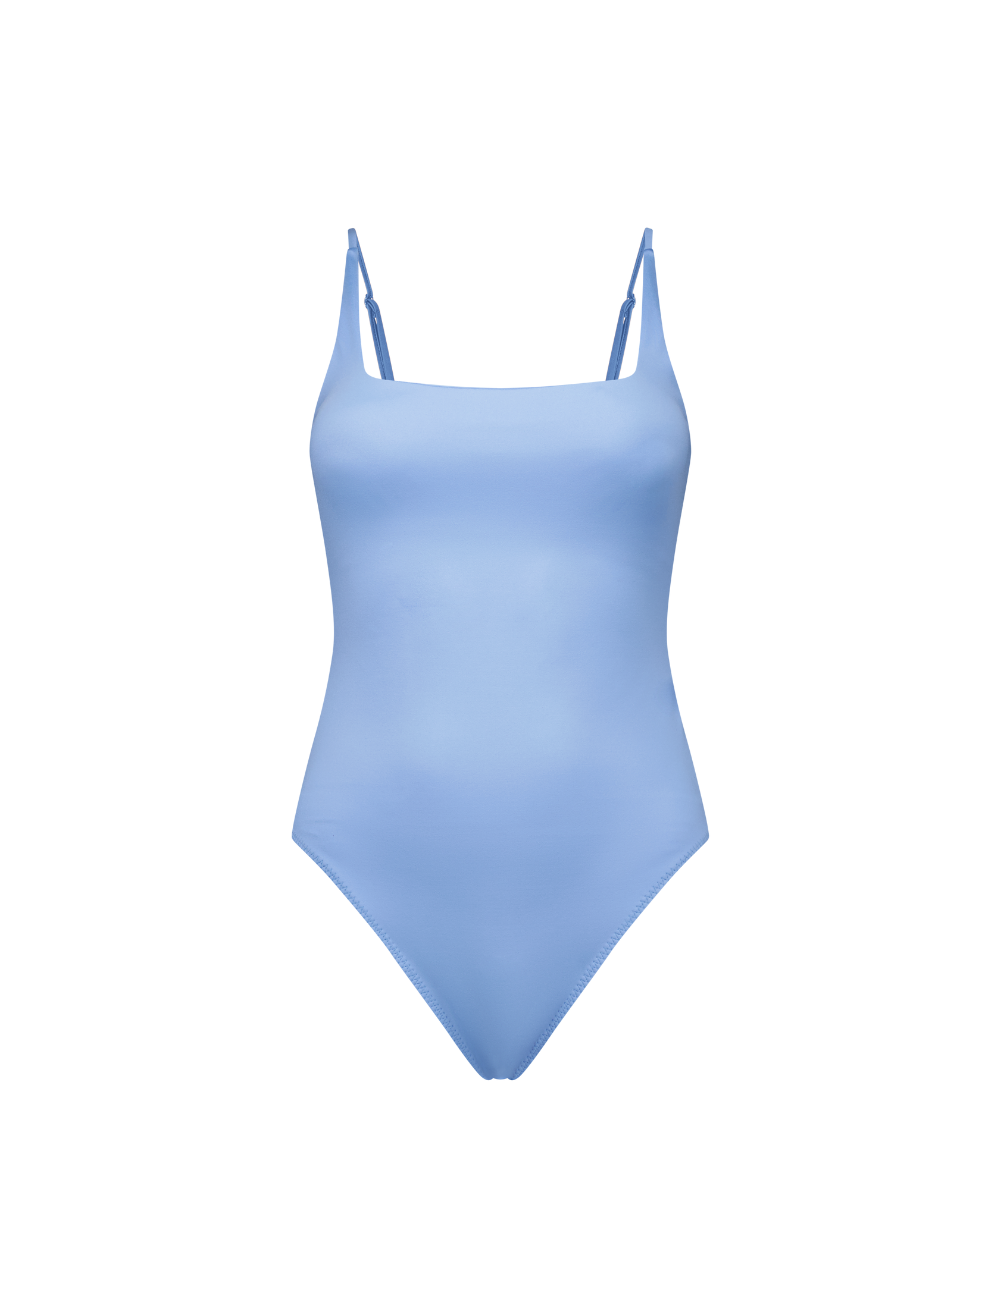 The Best One Piece Periwinkle